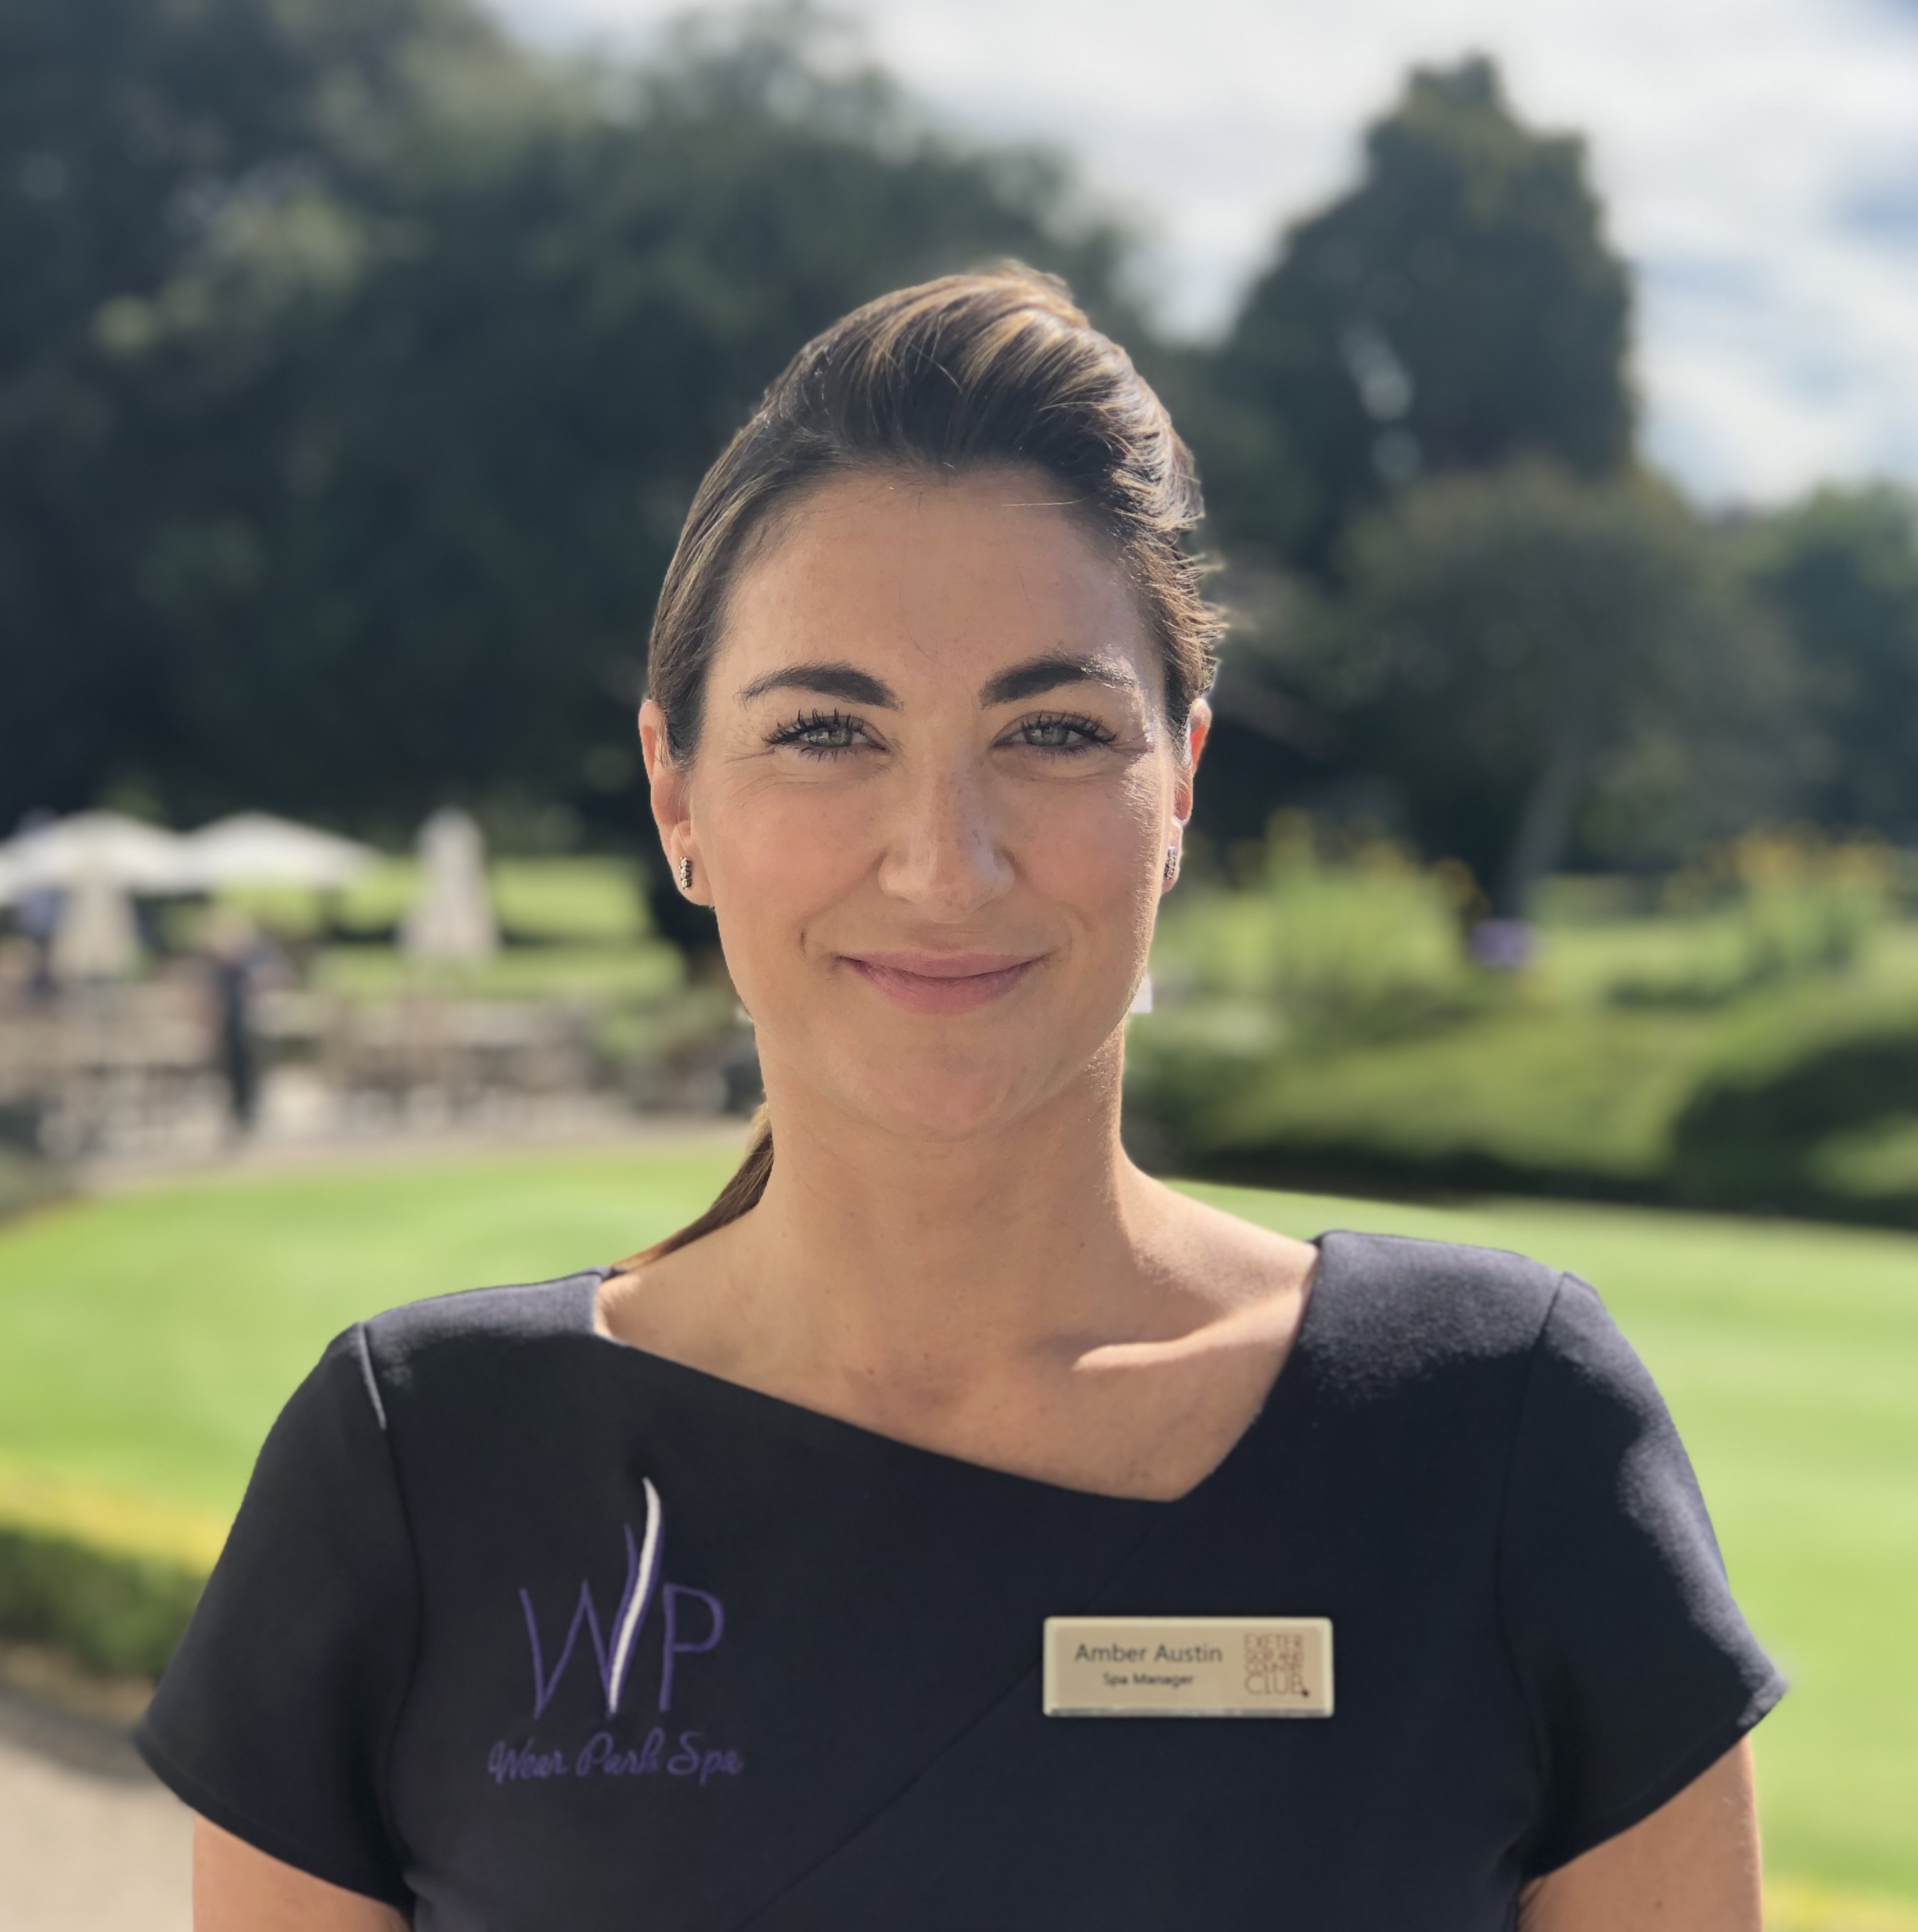 amber, wear park spa, exeter golf and country club